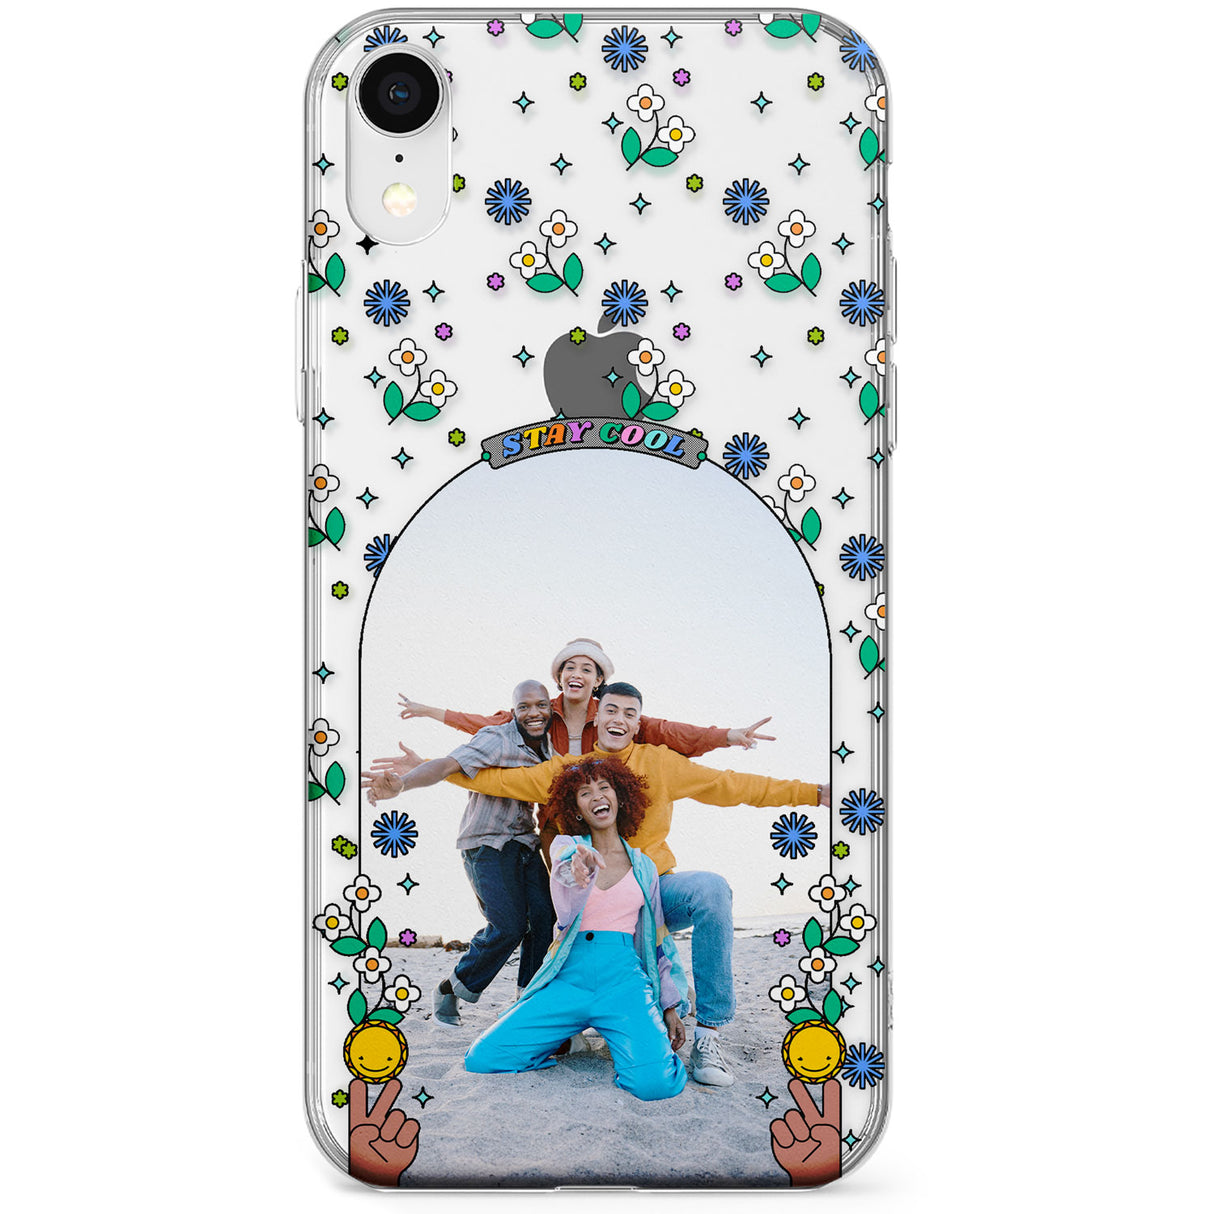 Personalised Summer Photo Frame Phone Case for iPhone X, XS Max, XR